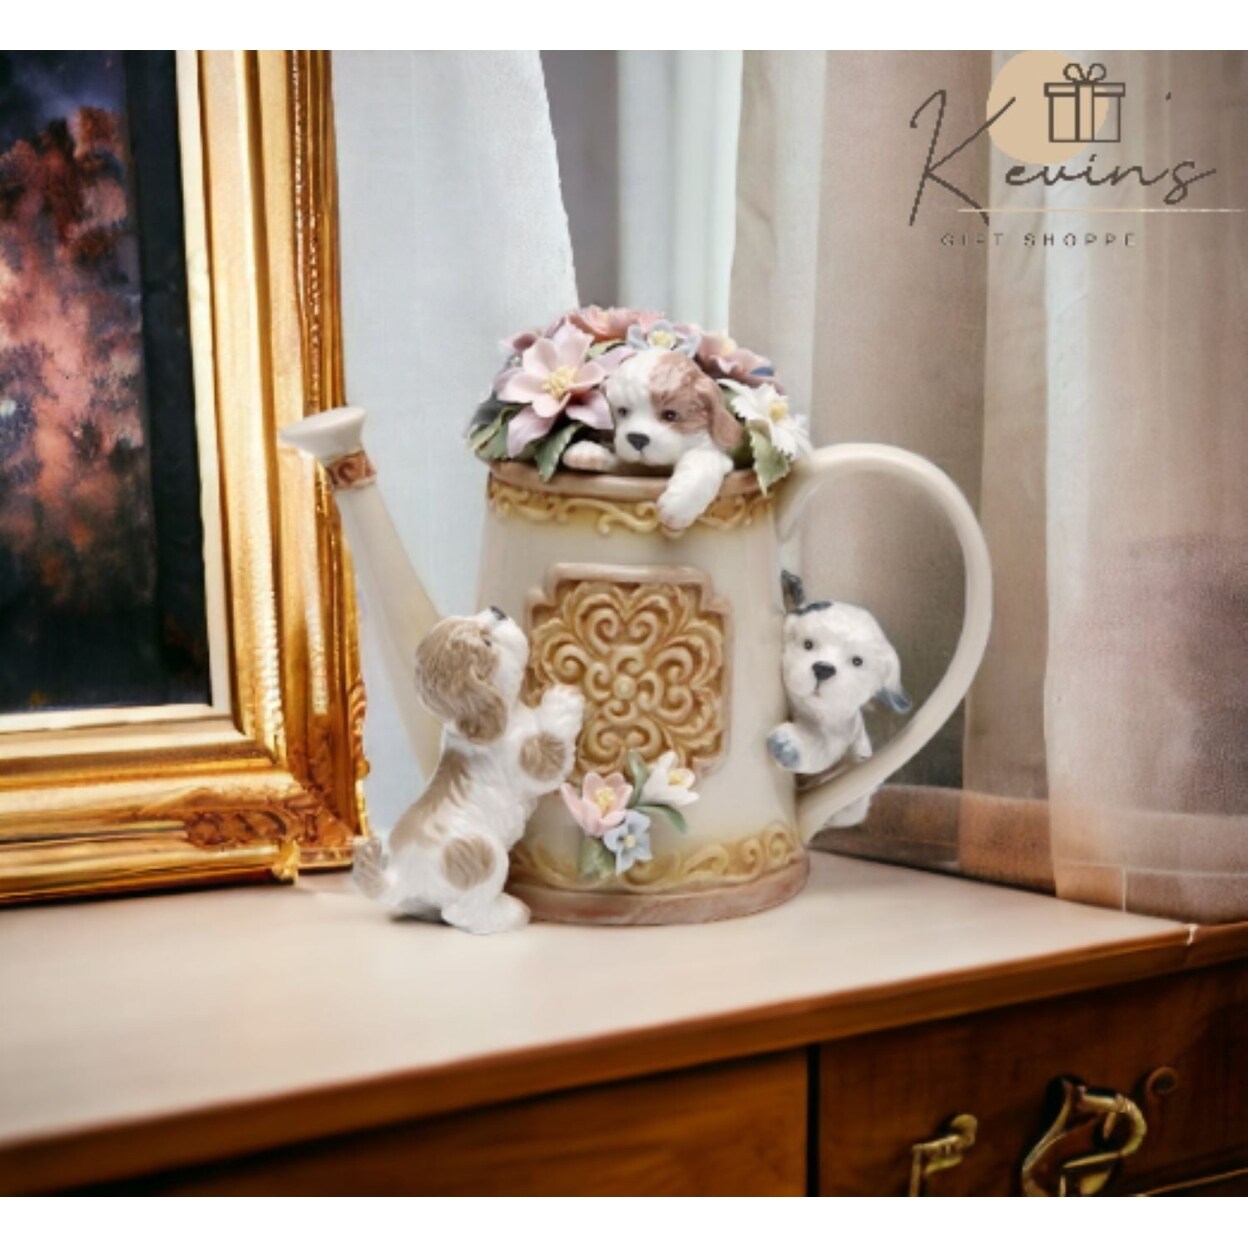 kevinsgiftshoppe Ceramic Puppies Playing with Flower Pitcher Music Box Home Decor   Kitchen Decor